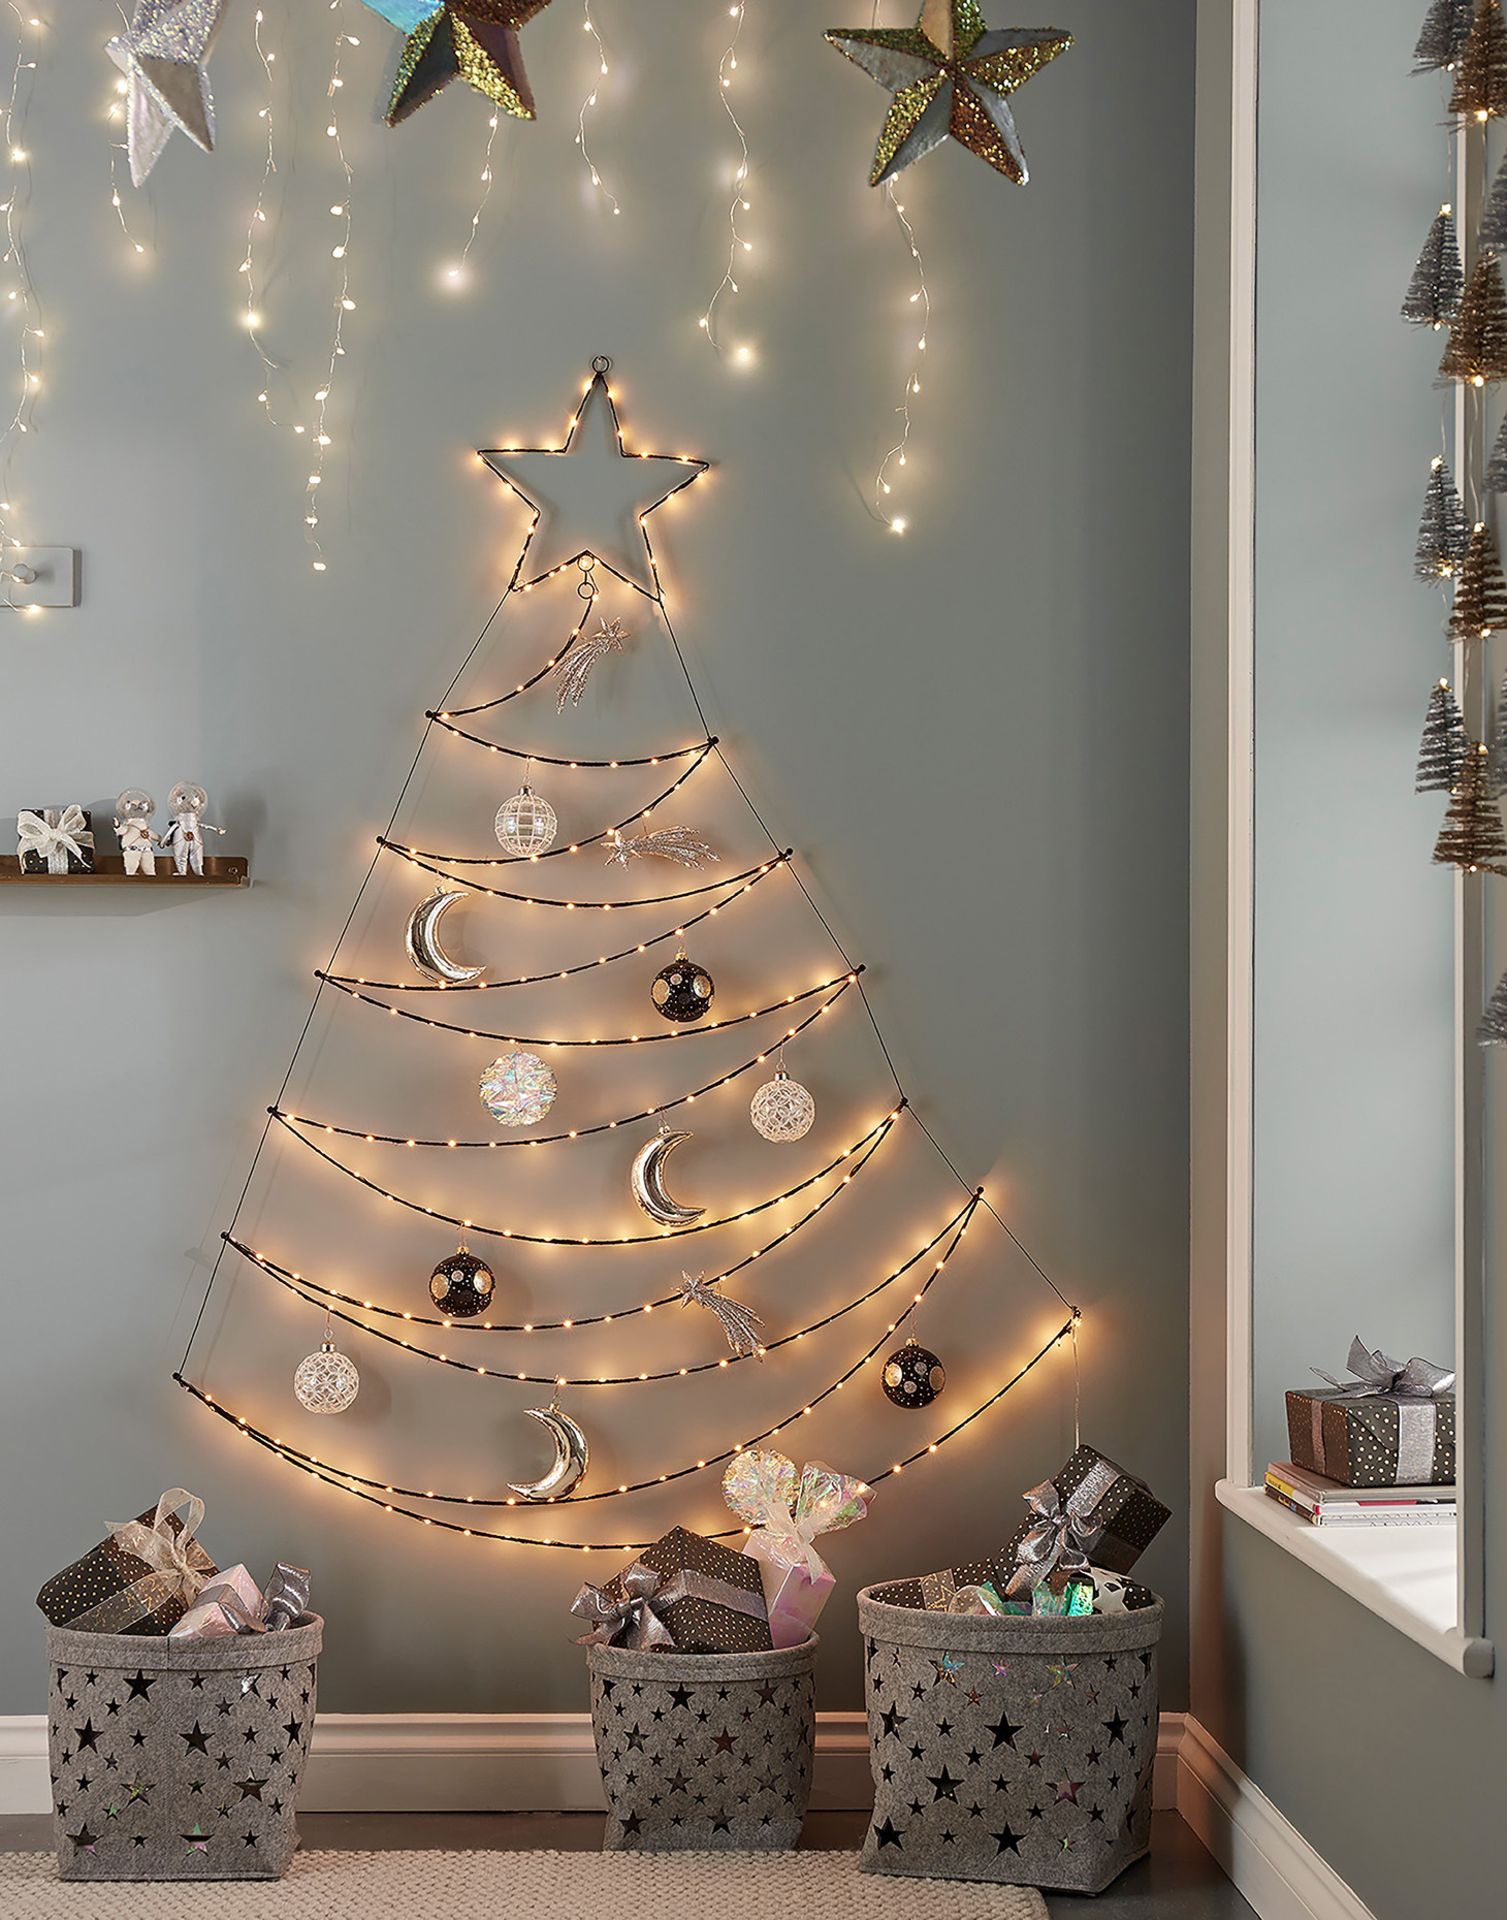 Cox & Cox Indoor Outdoor Magical String Light Tree. RRP £95.00. Designed to capture the swag of a